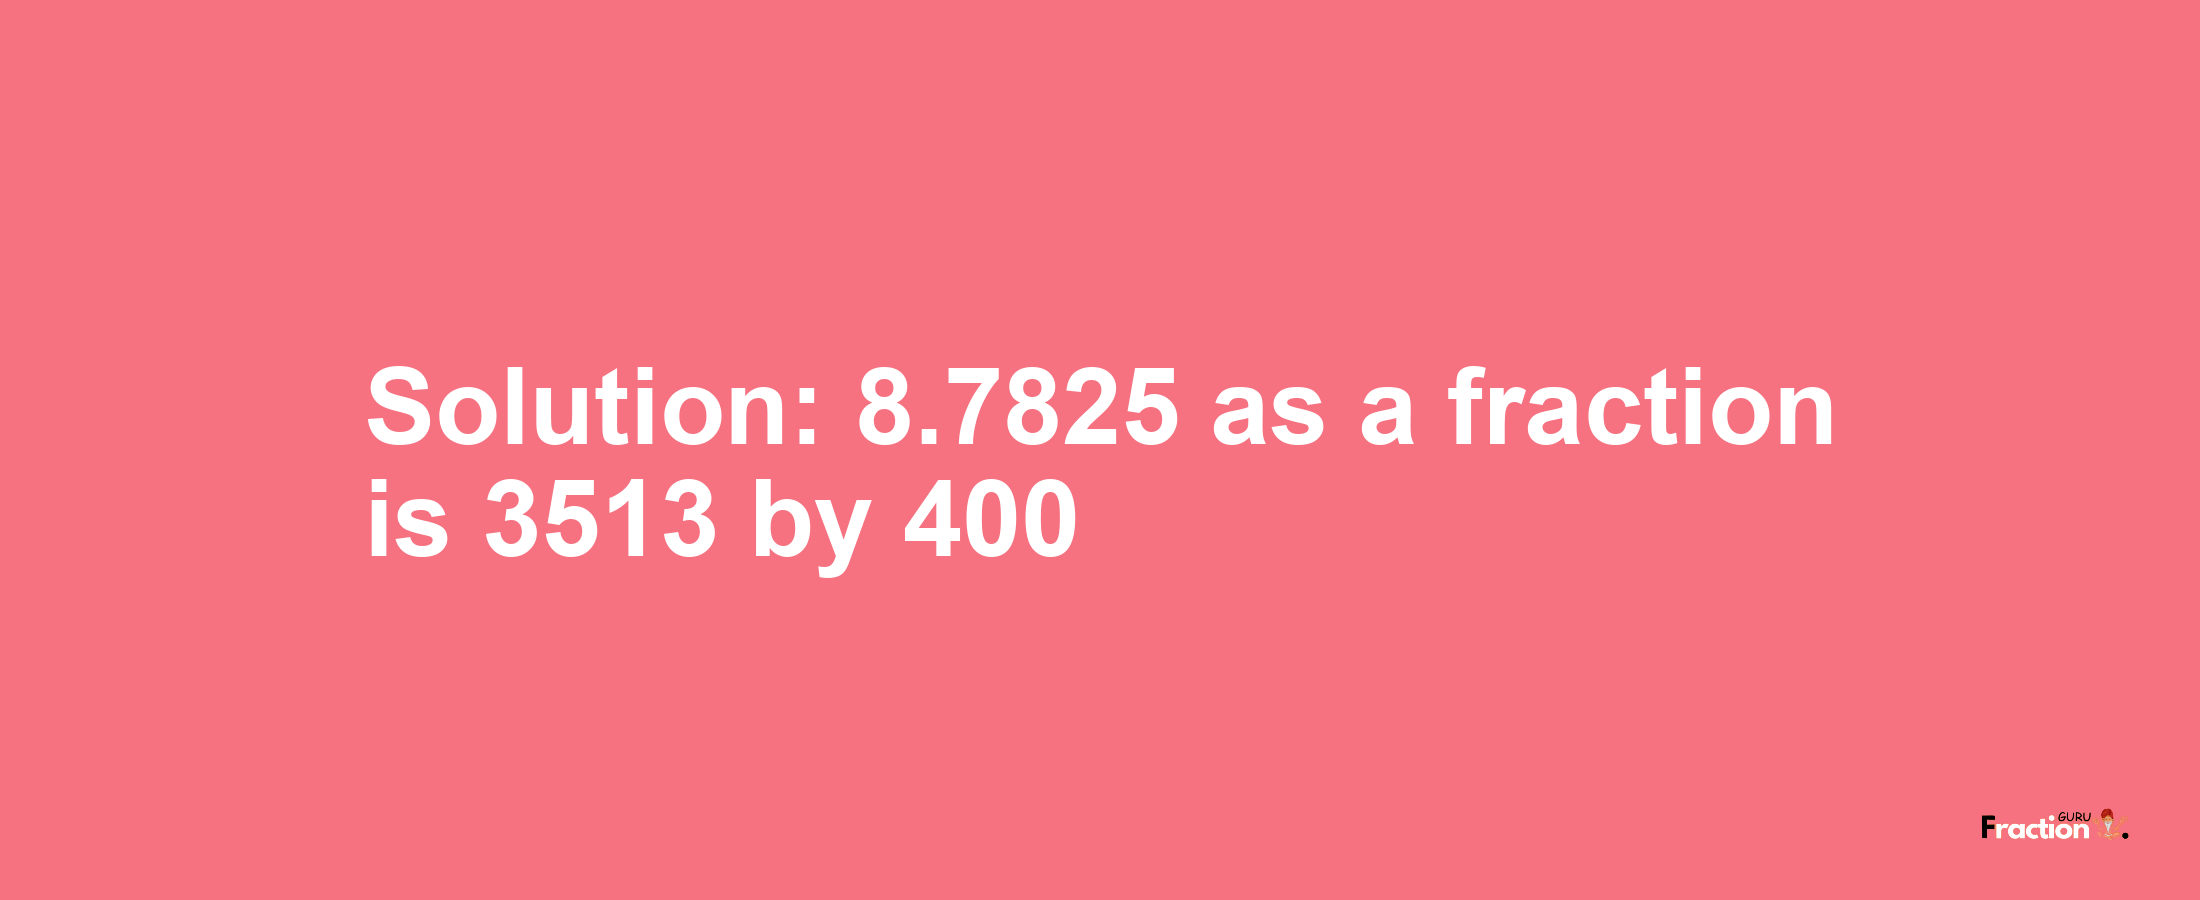 Solution:8.7825 as a fraction is 3513/400